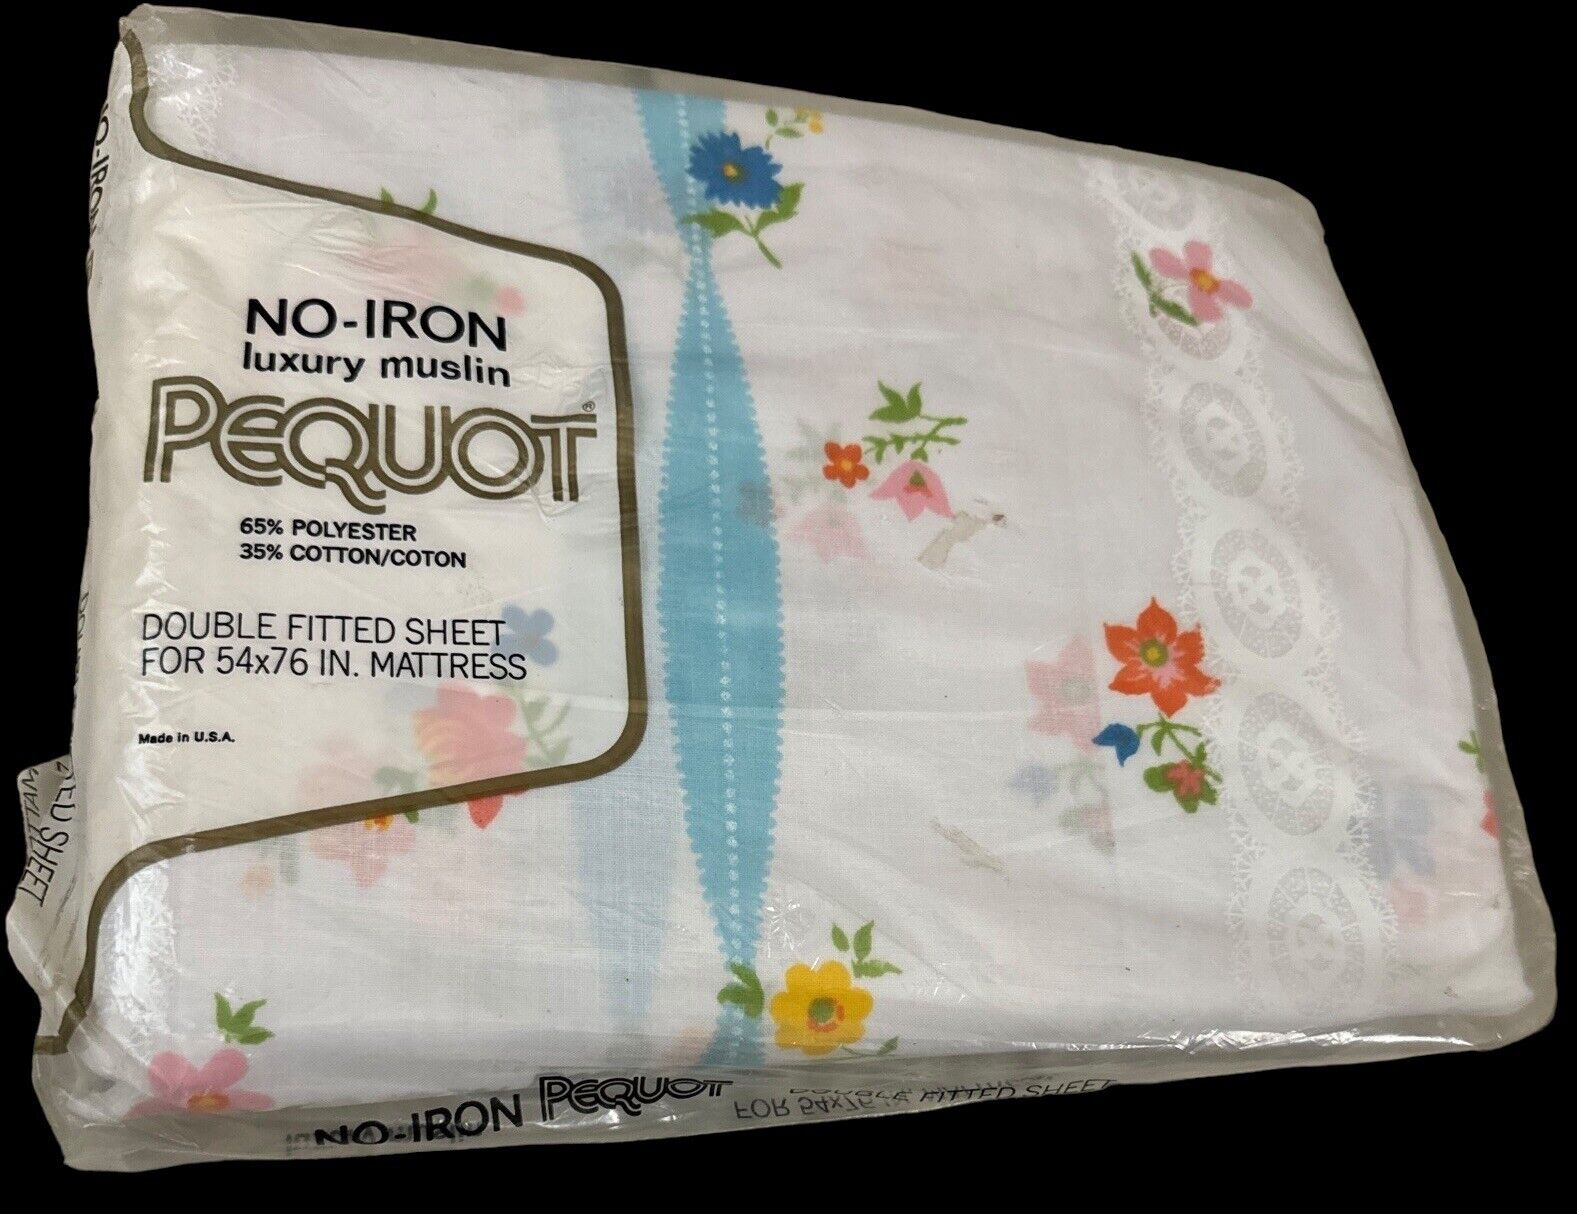 Vtg Pequot No Iron Luxury Muslin Double Fitted Sheet 54x76 Floral Made In USA